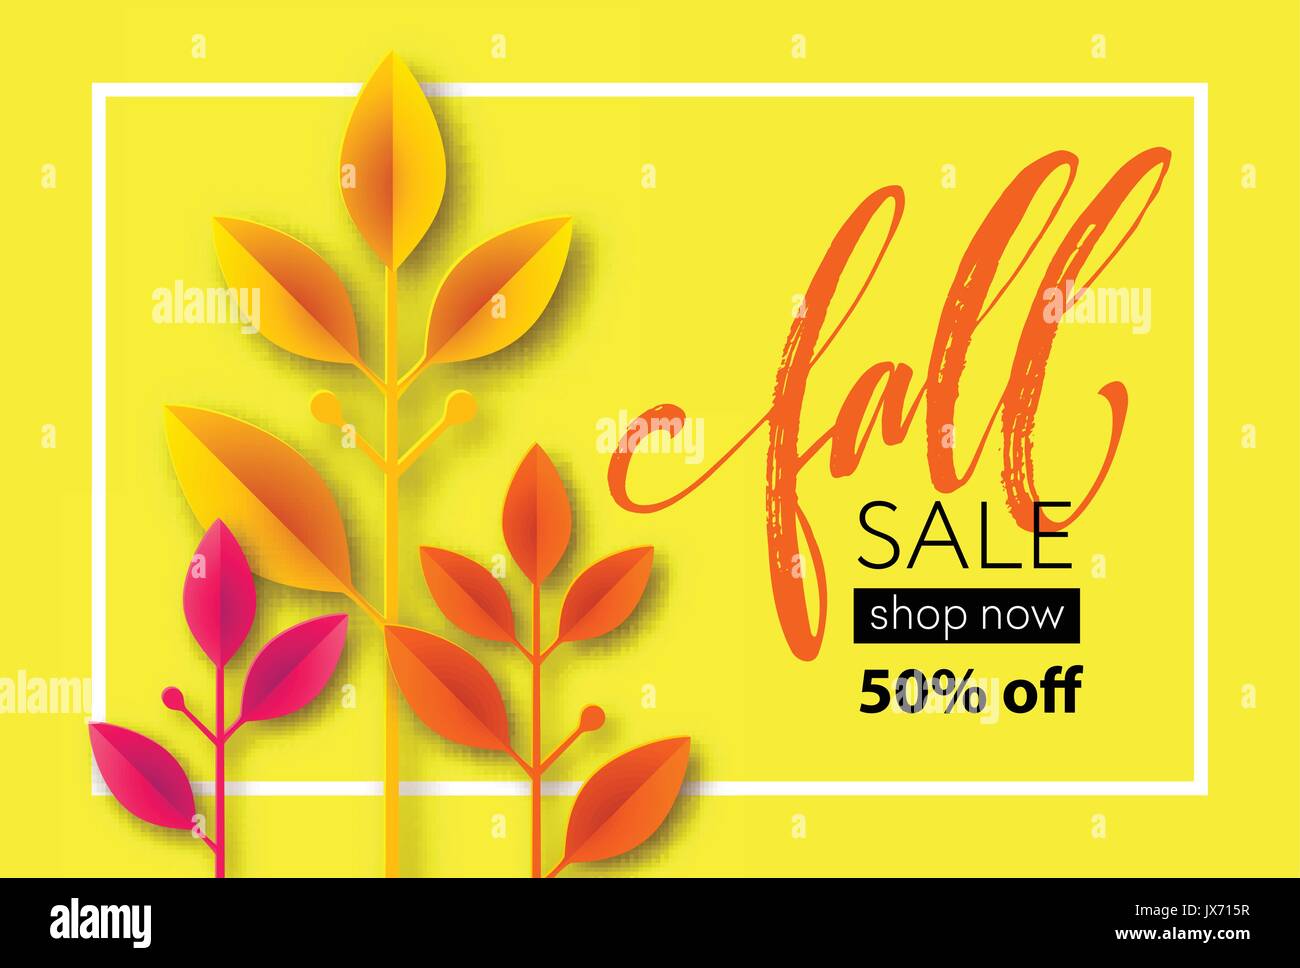 Fall sale background design with colorful paper cut autumn leaves. Vector illustration Stock Vector